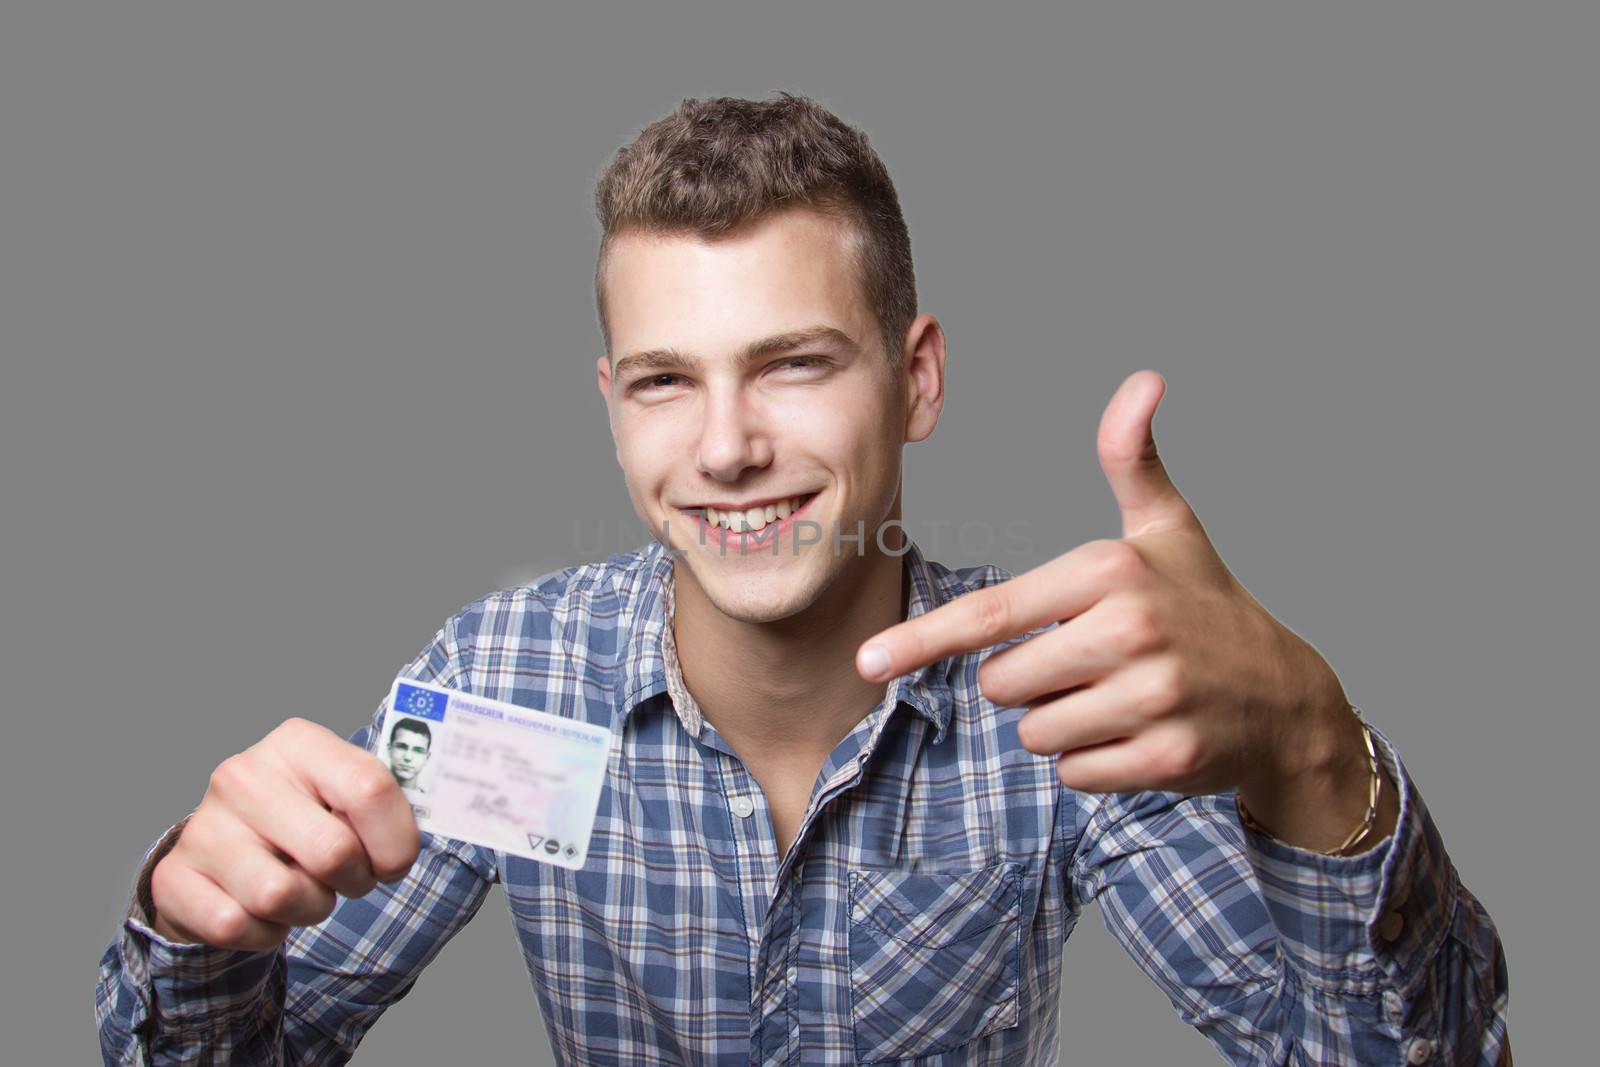 Young man showing off his driver license by Cursedsenses